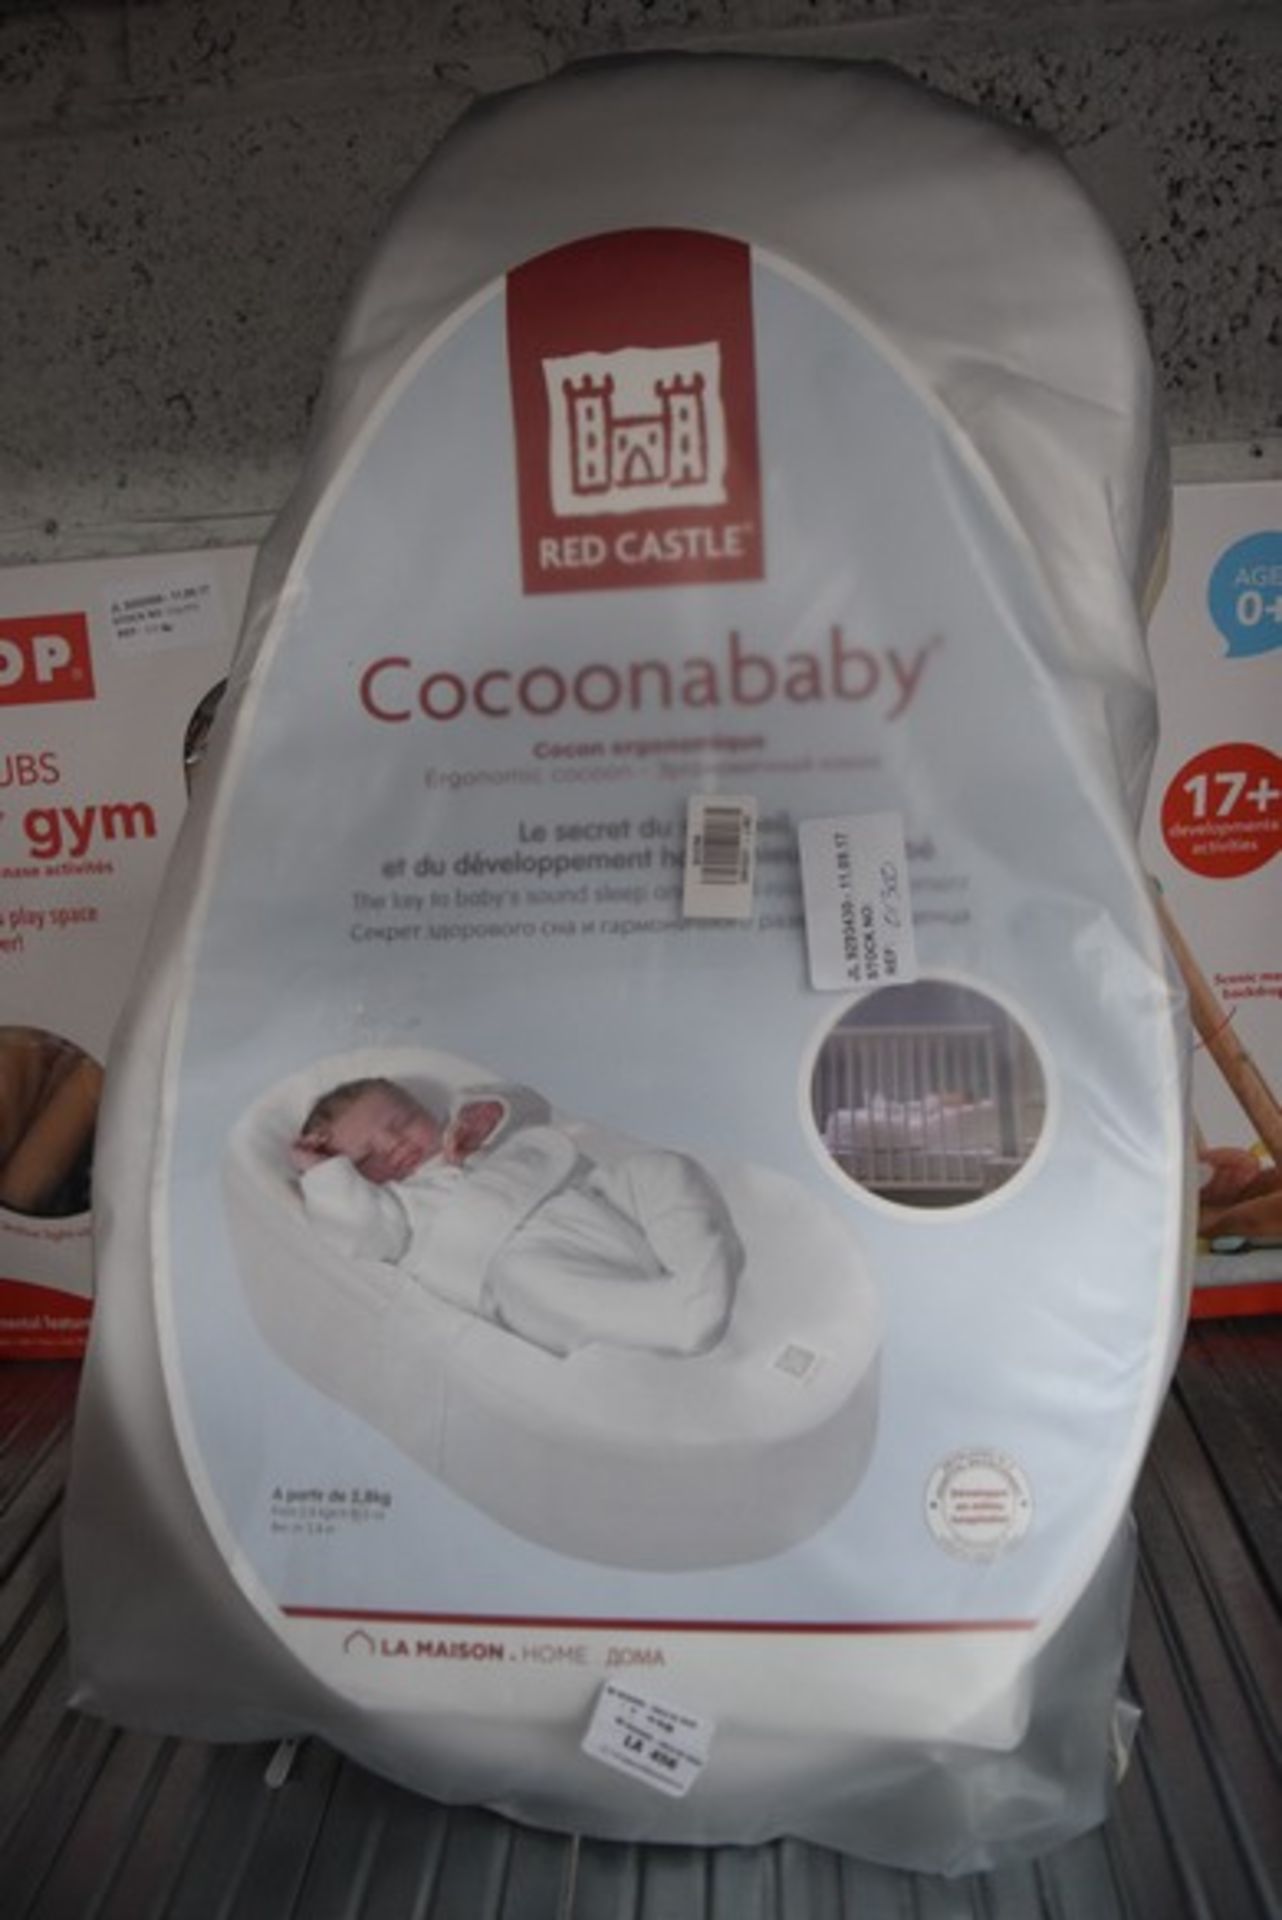 1 x RED CASTLE COCOONABABY RRP £130 11.09.17 (3412766) *PLEASE NOTE THAT THE BID PRICE IS MULTIPLIED